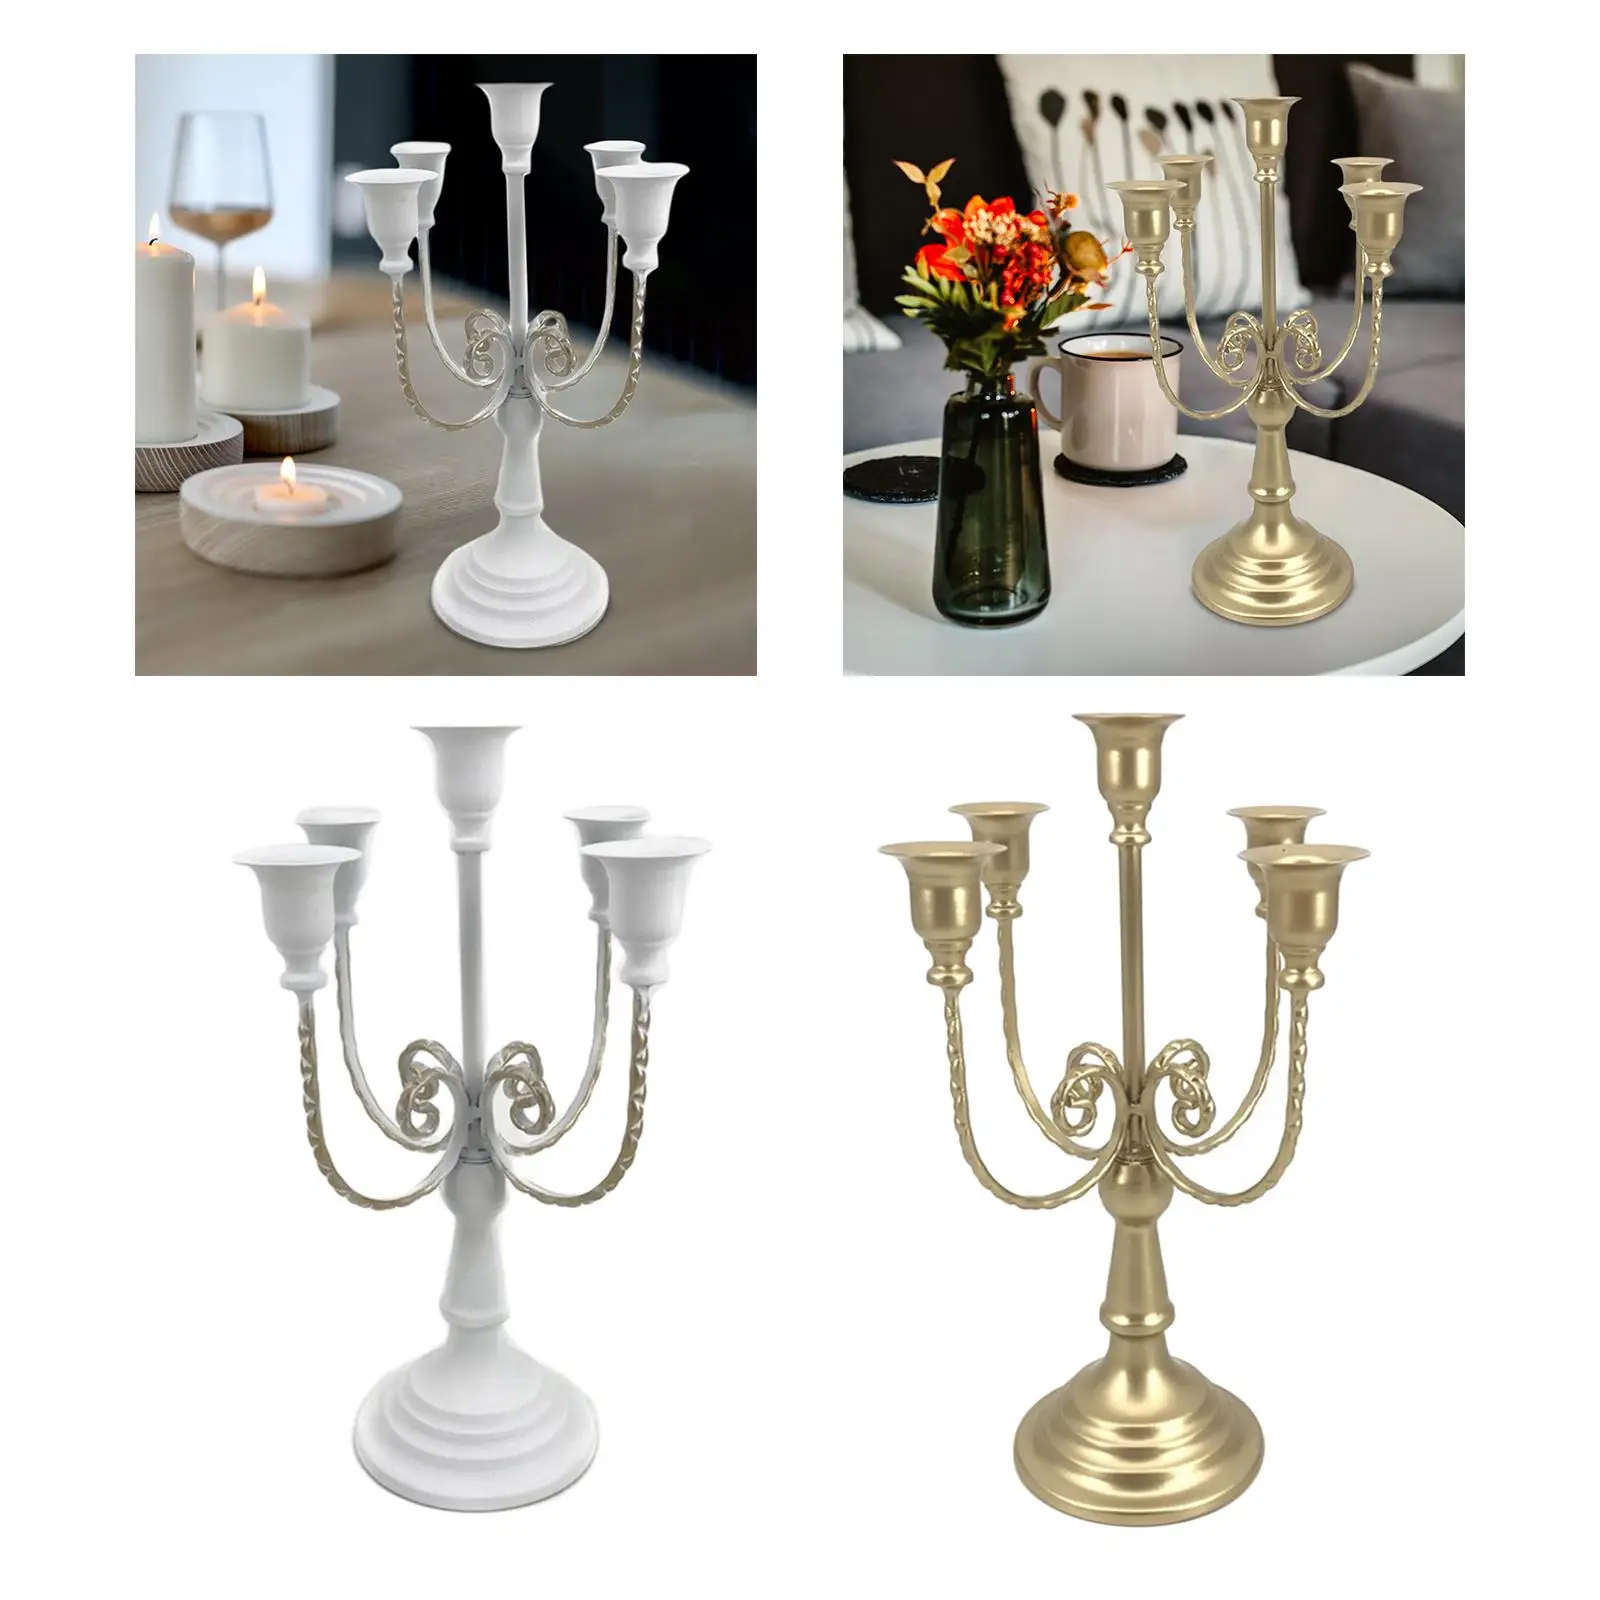 5 Headed Metal Candle Holder Candelabra Centerpiece Gift Decorative Pillar Stand Ornament for Wedding Parties Table Dinner Event